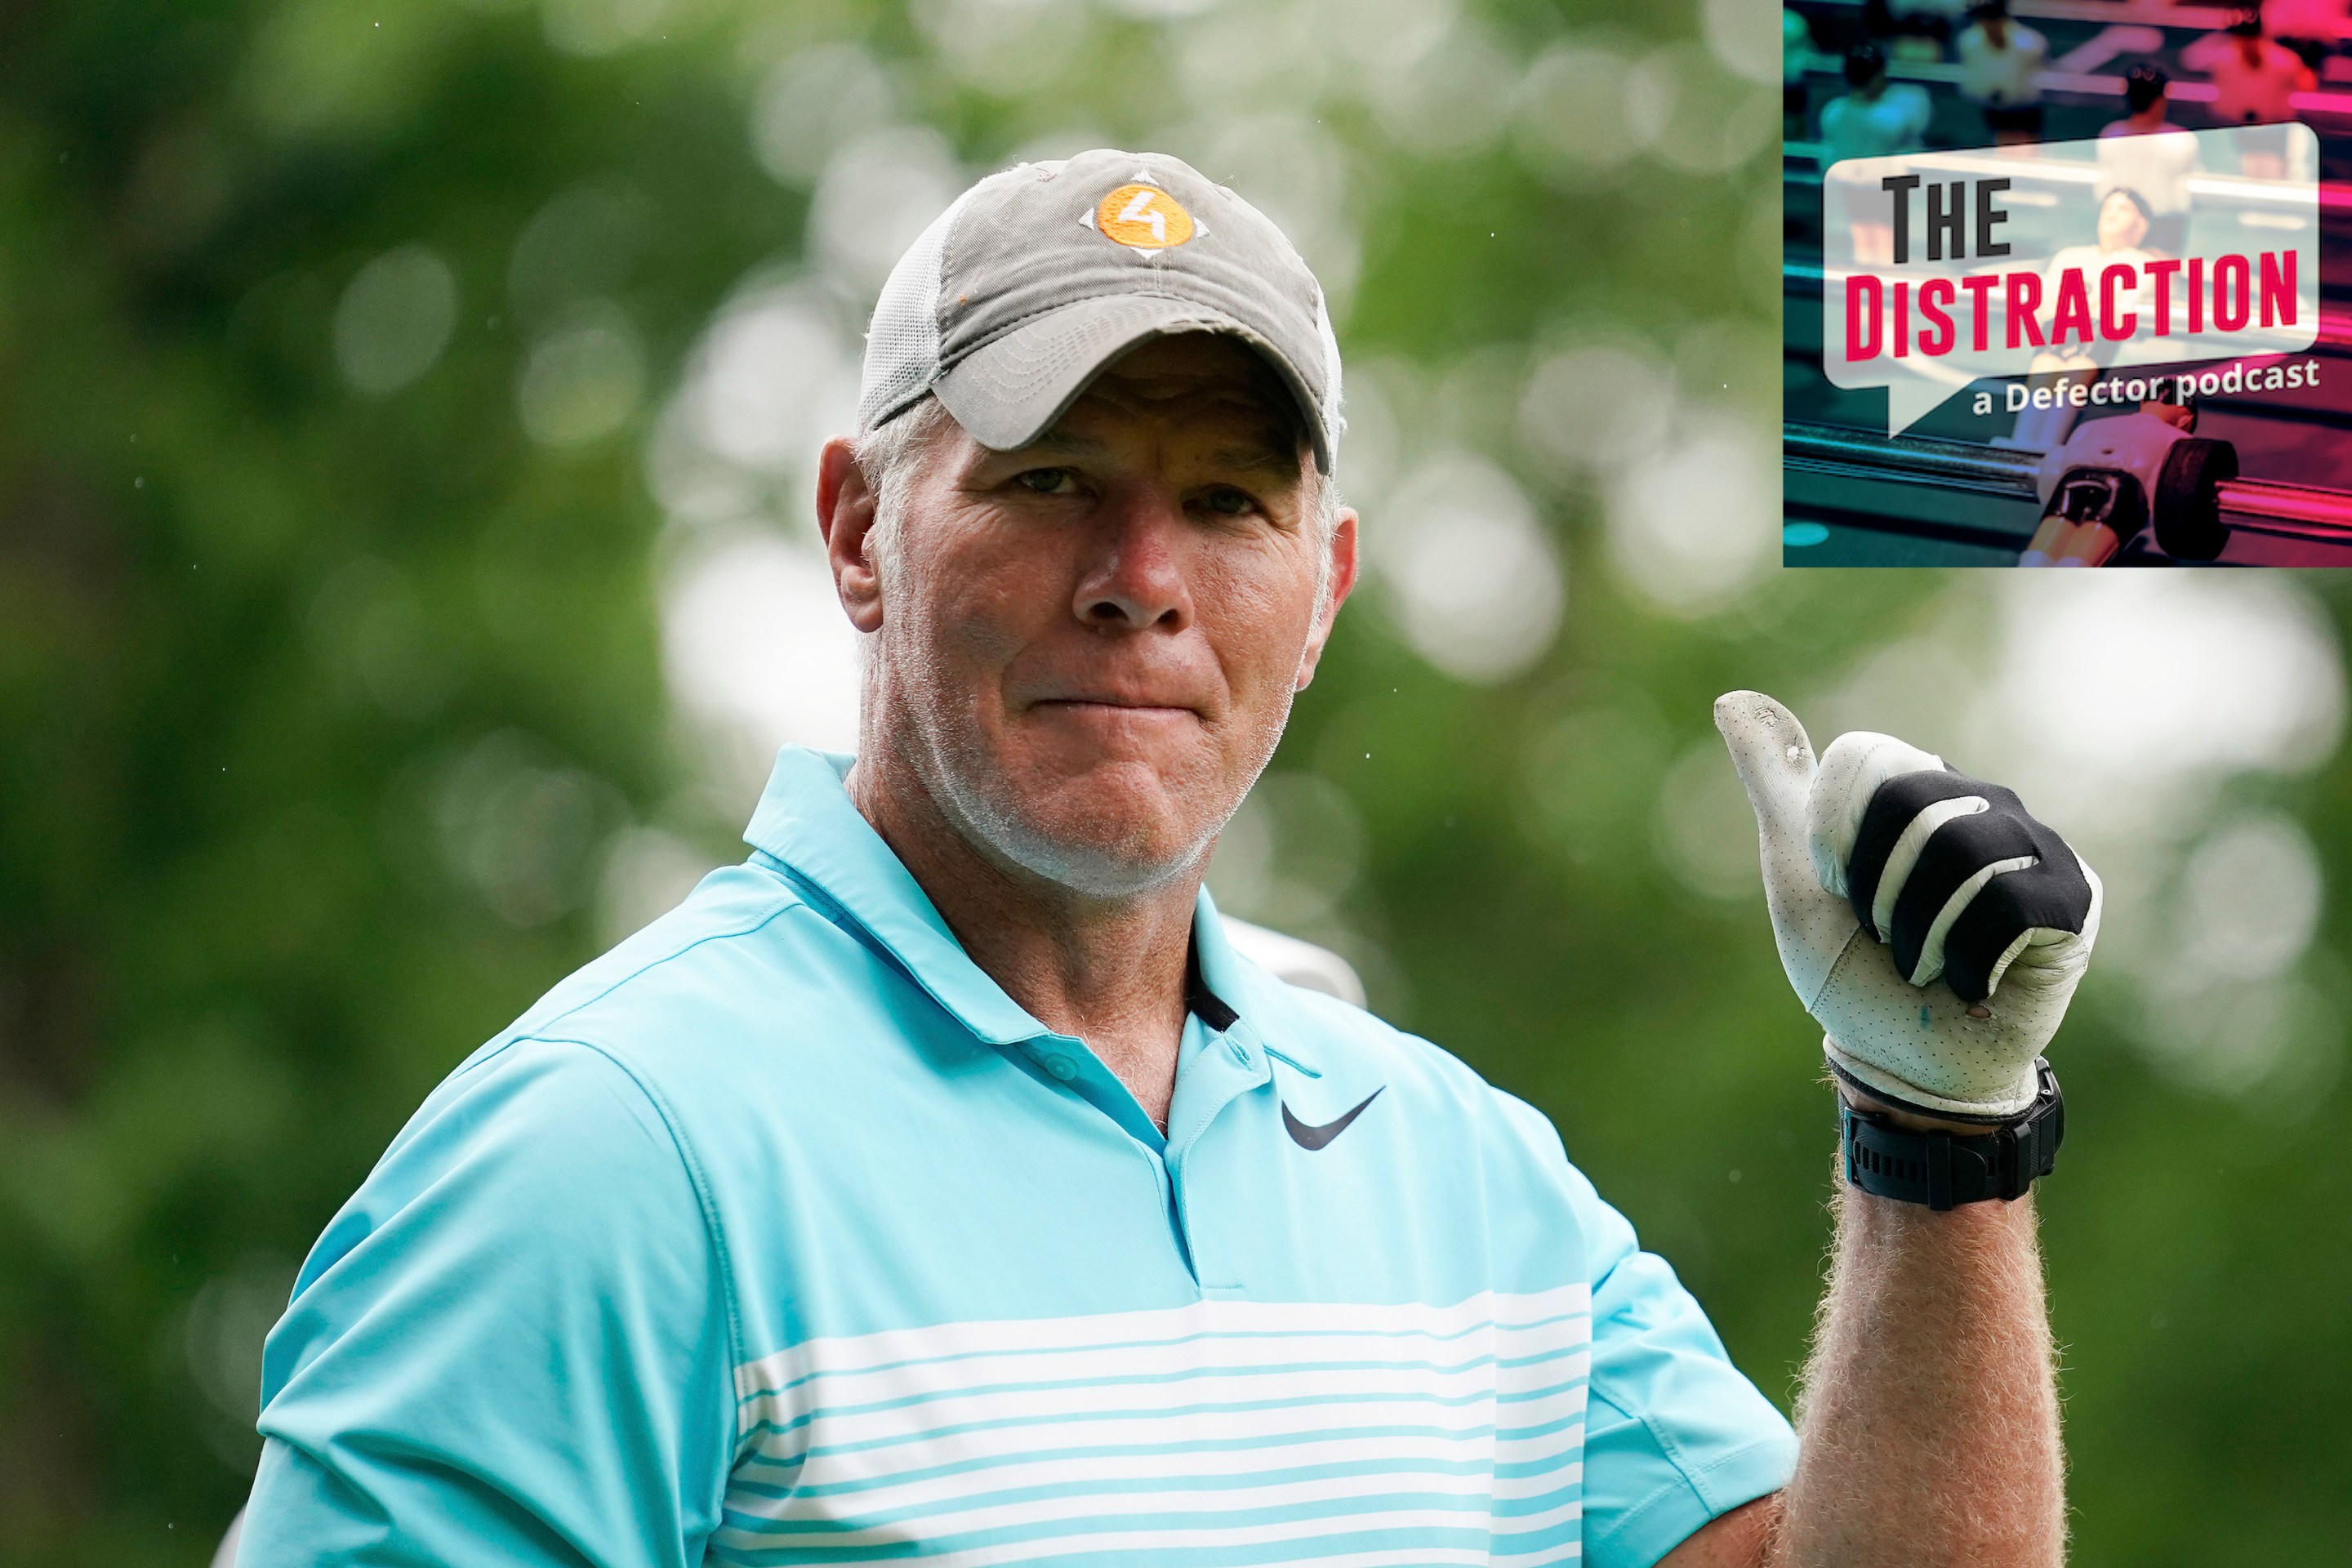 Brett Favre gives the camera a thumbs up while playing in the American Family Insurance Championship golf event in Wisconsin, in June of 2022.